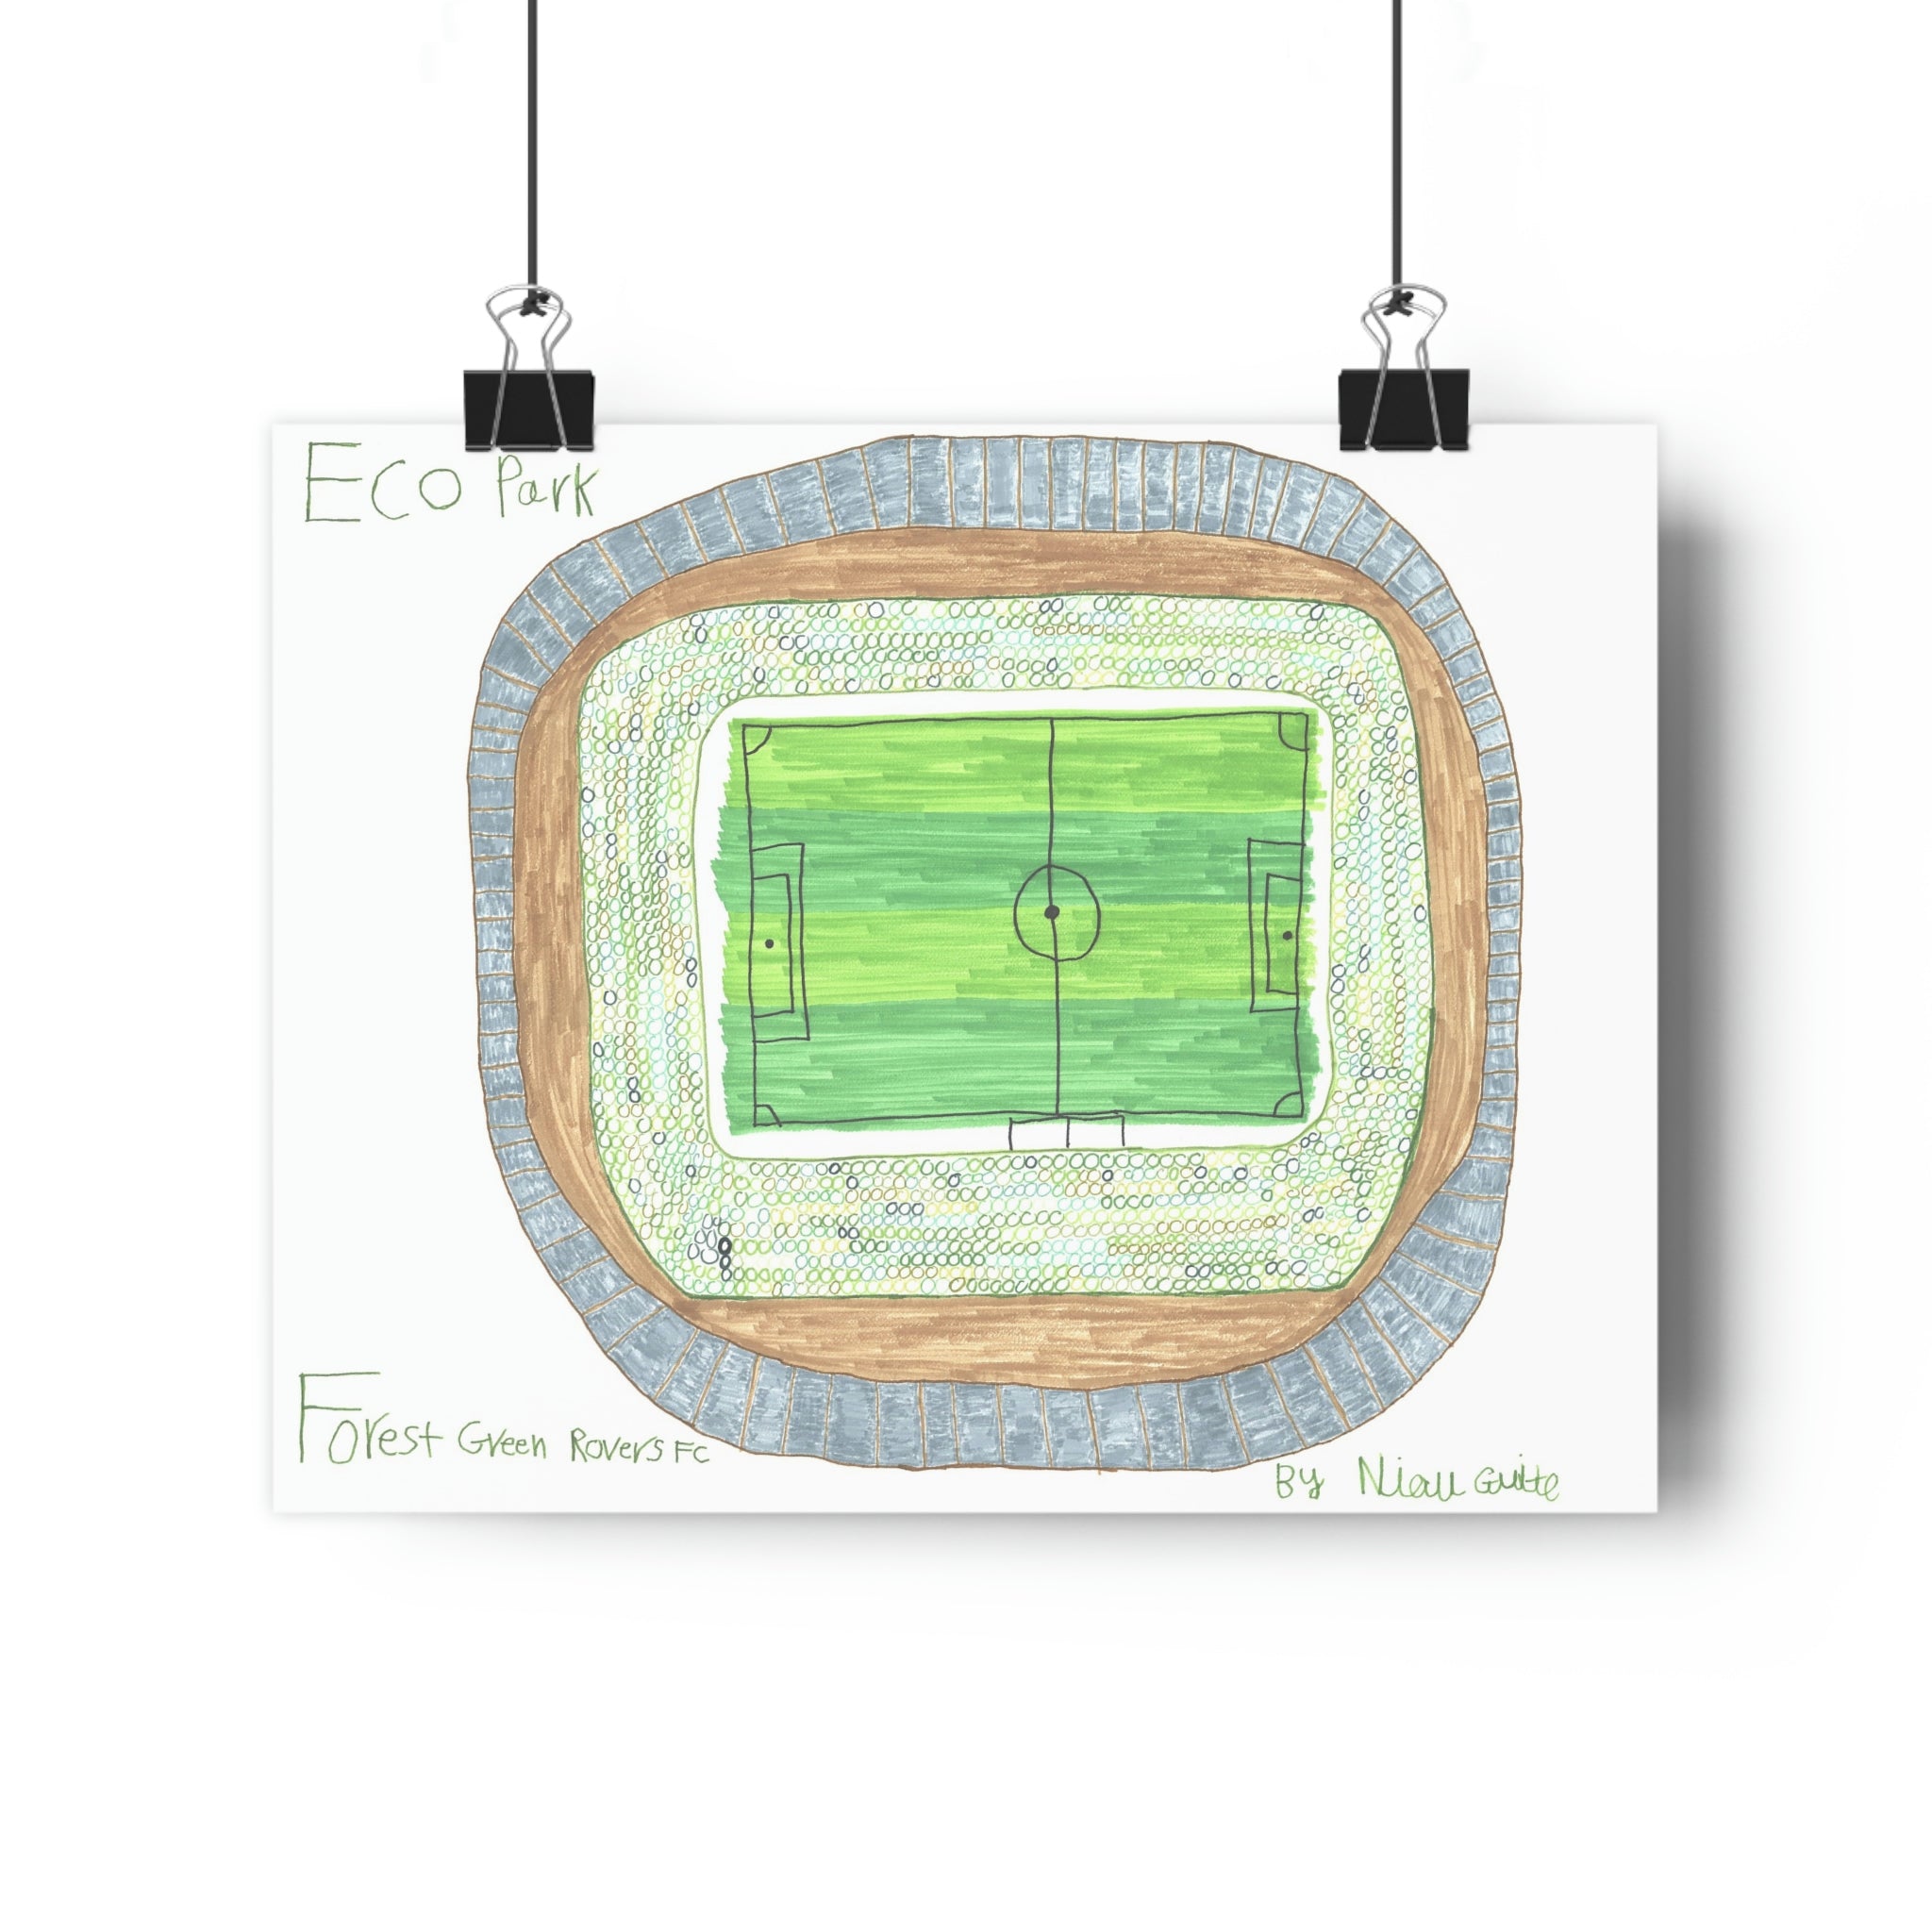 Forest Green Rovers - Eco Park - Print